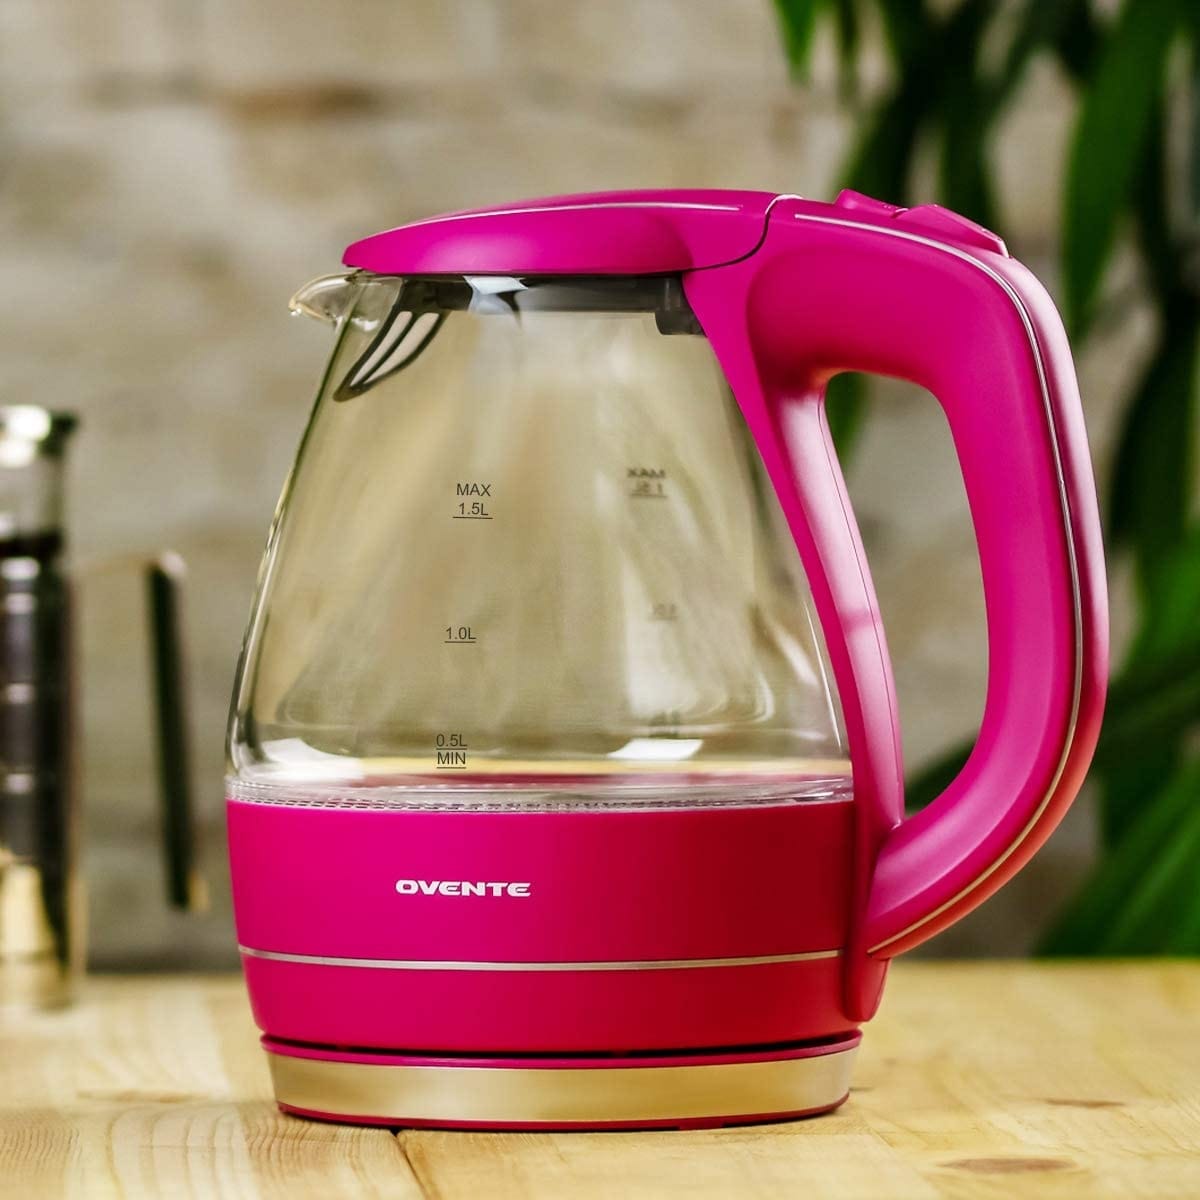 https://ak1.ostkcdn.com/images/products/is/images/direct/f86da78d934ef269fad00304b4511841b9e25b10/Ovente-Portable-Electric-Glass-Kettle-1.5-Liter-with-Blue-LED-Light-and-Stainless-Steel-Base%2C-Pink-KG83F.jpg